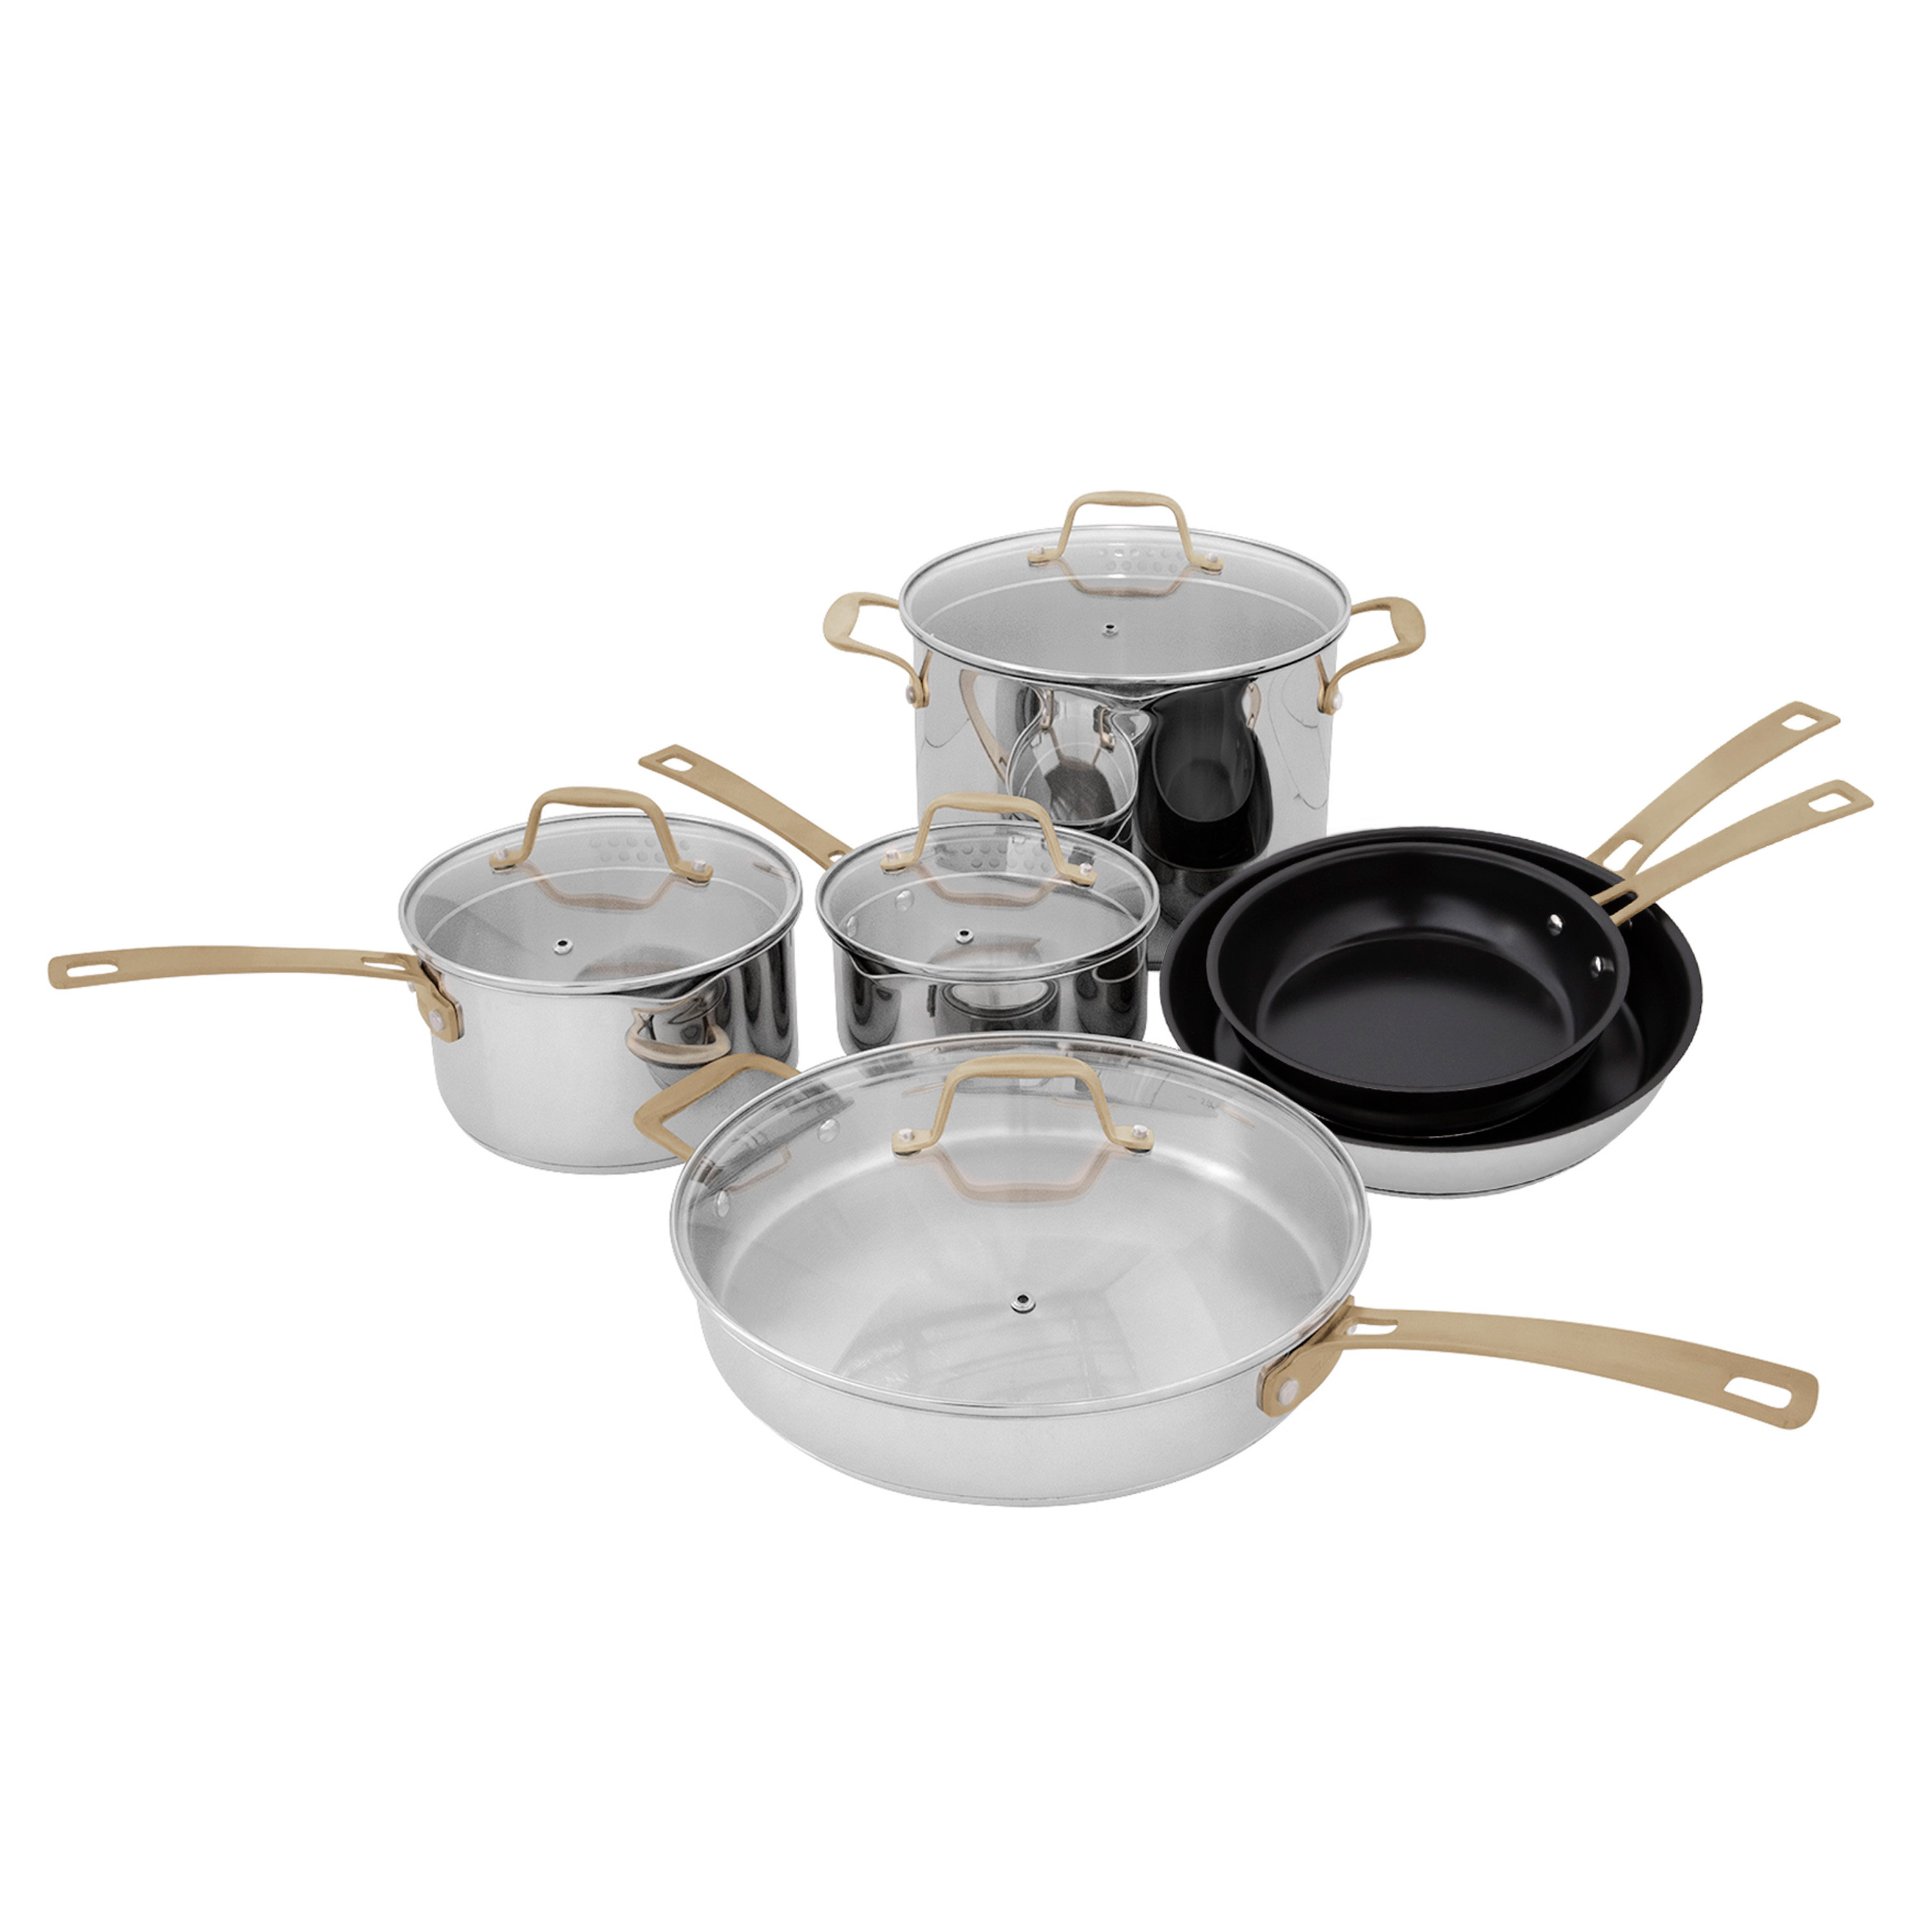 Non Stick Kitchen Cookware Set Premium 7pc - German Coated Pots and Pans  Set - Nonstick Dishwasher Safe and 100% PFOA and PTFE Free - Induction